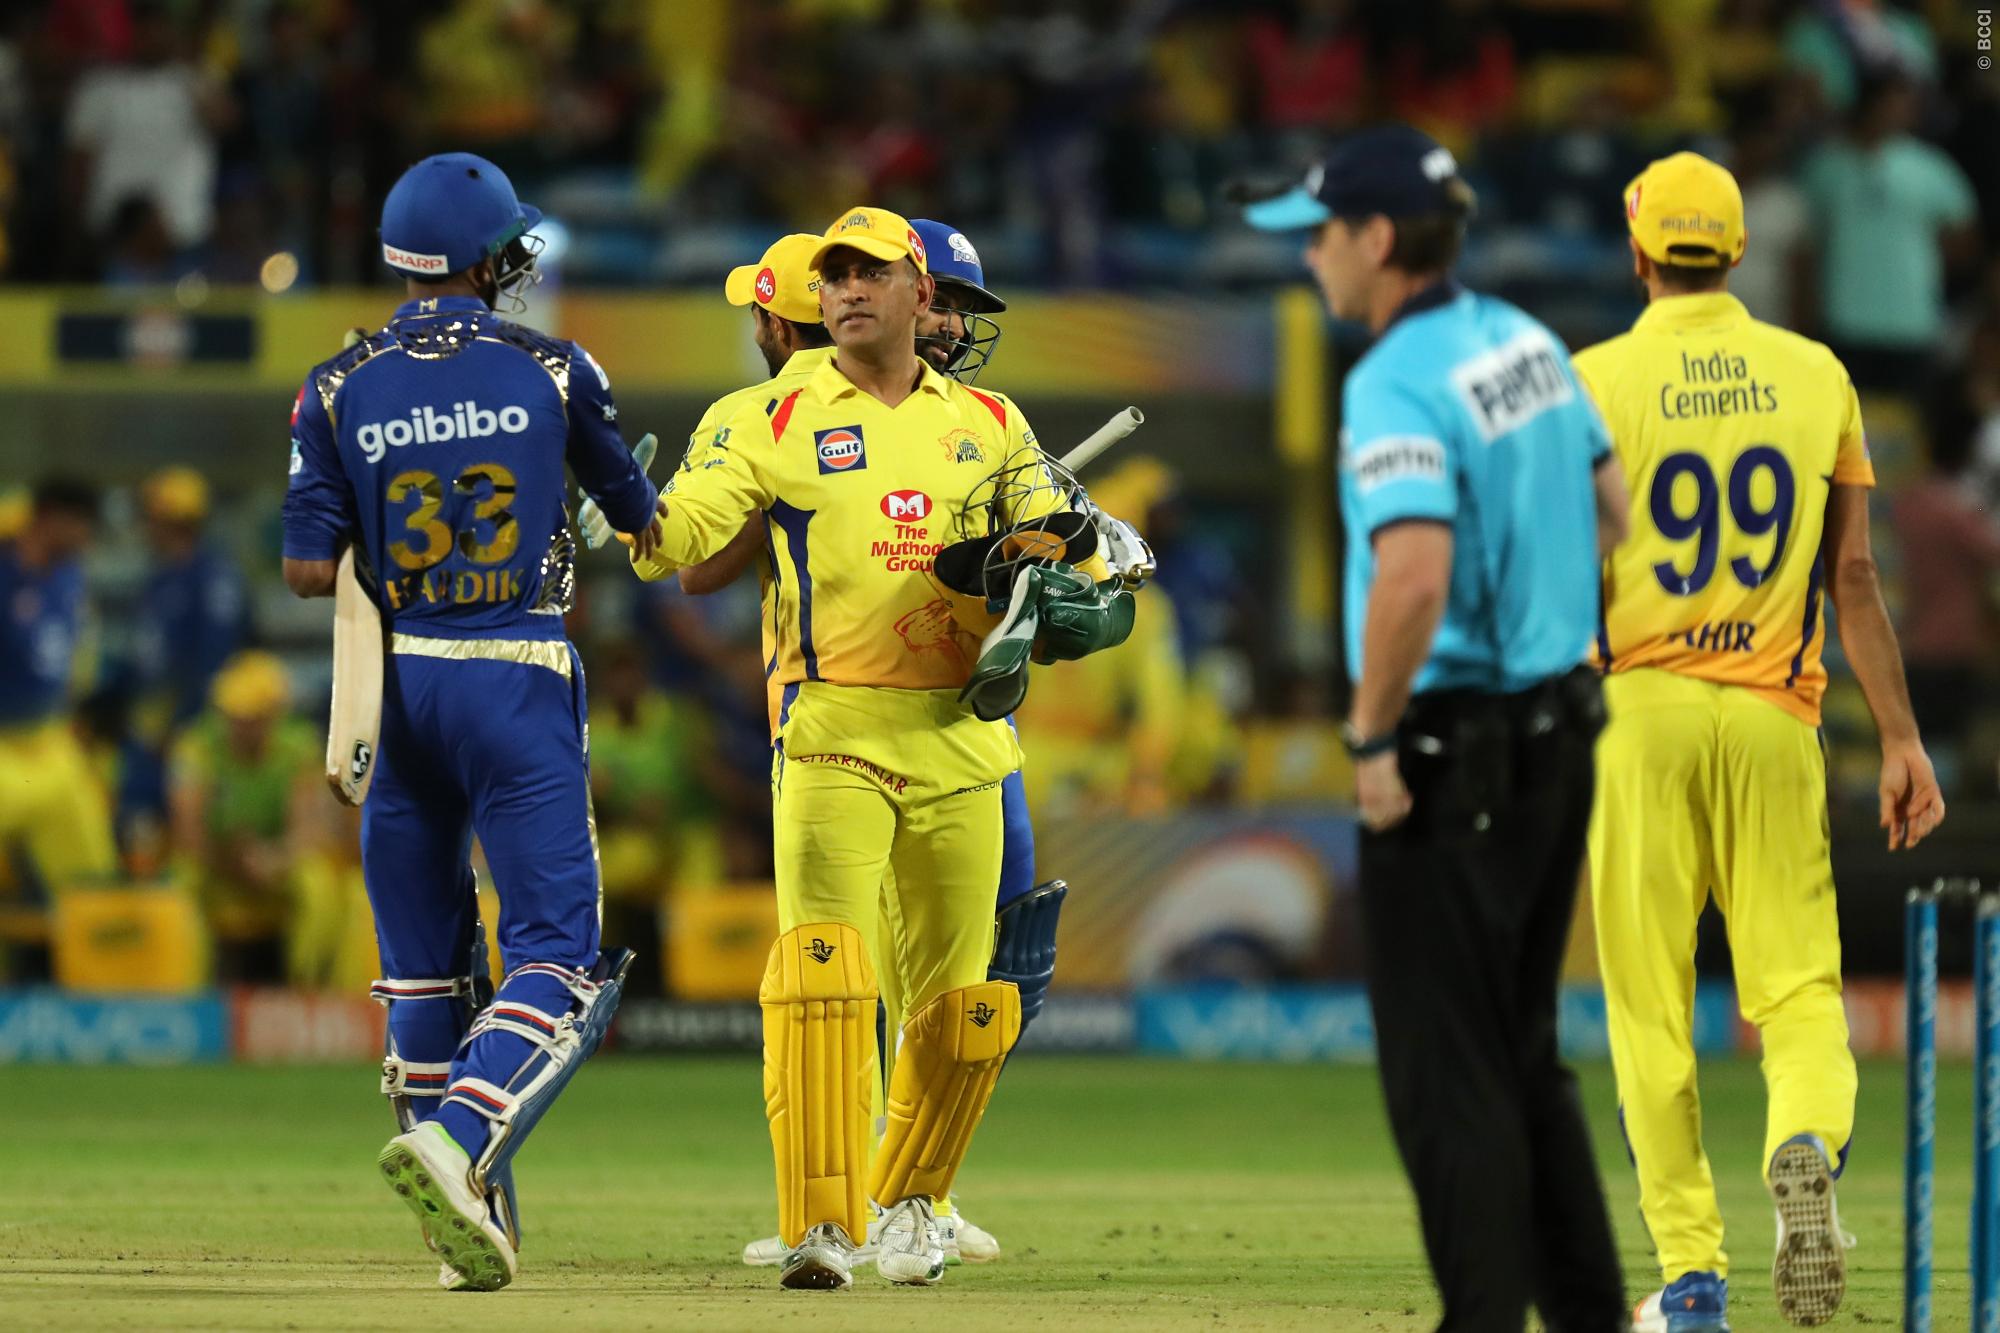 CSKVSMI IPL 2019 Dhoni told who was responsible for the loss of Chennai Super Kings